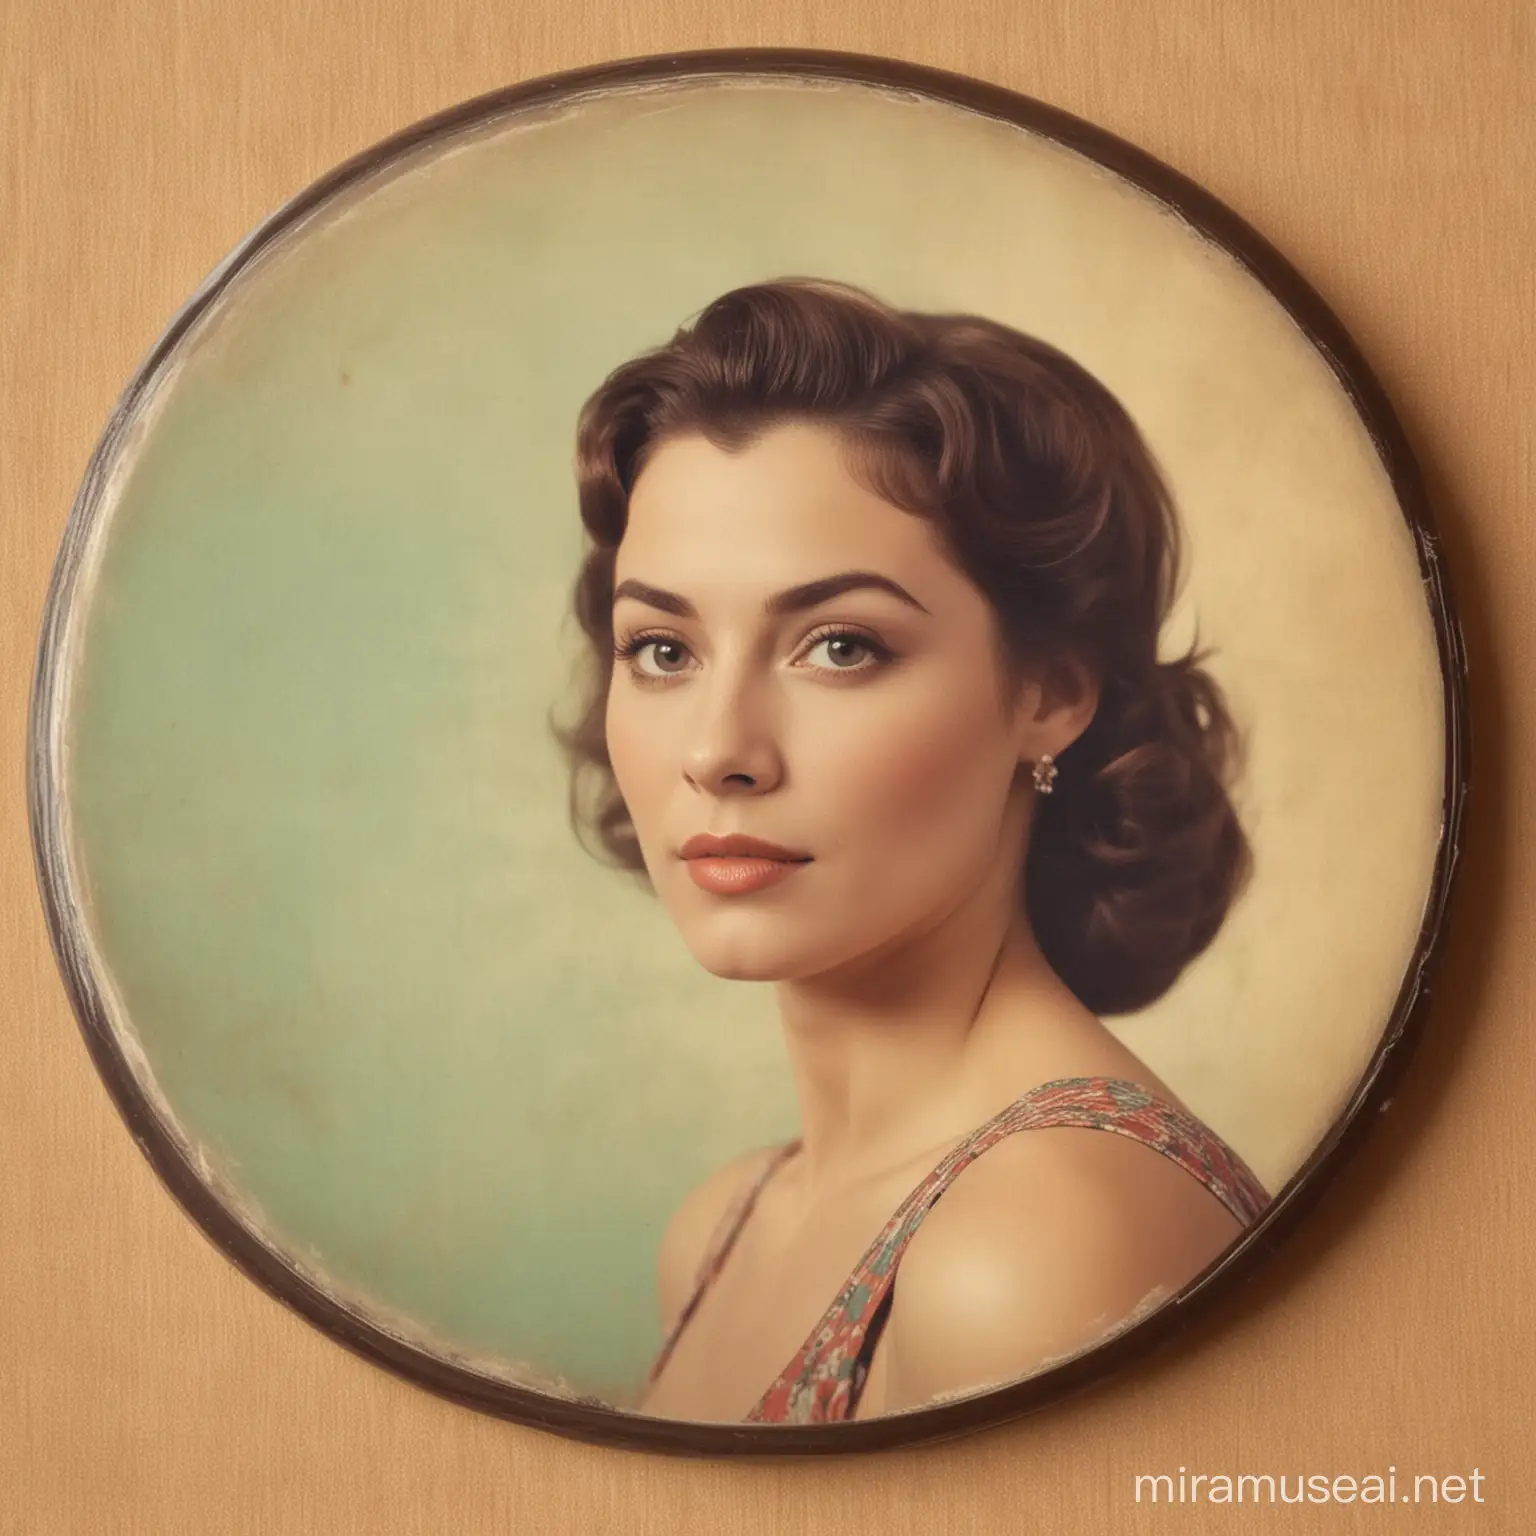 Vintage Woman in Center of Disc Cover Art